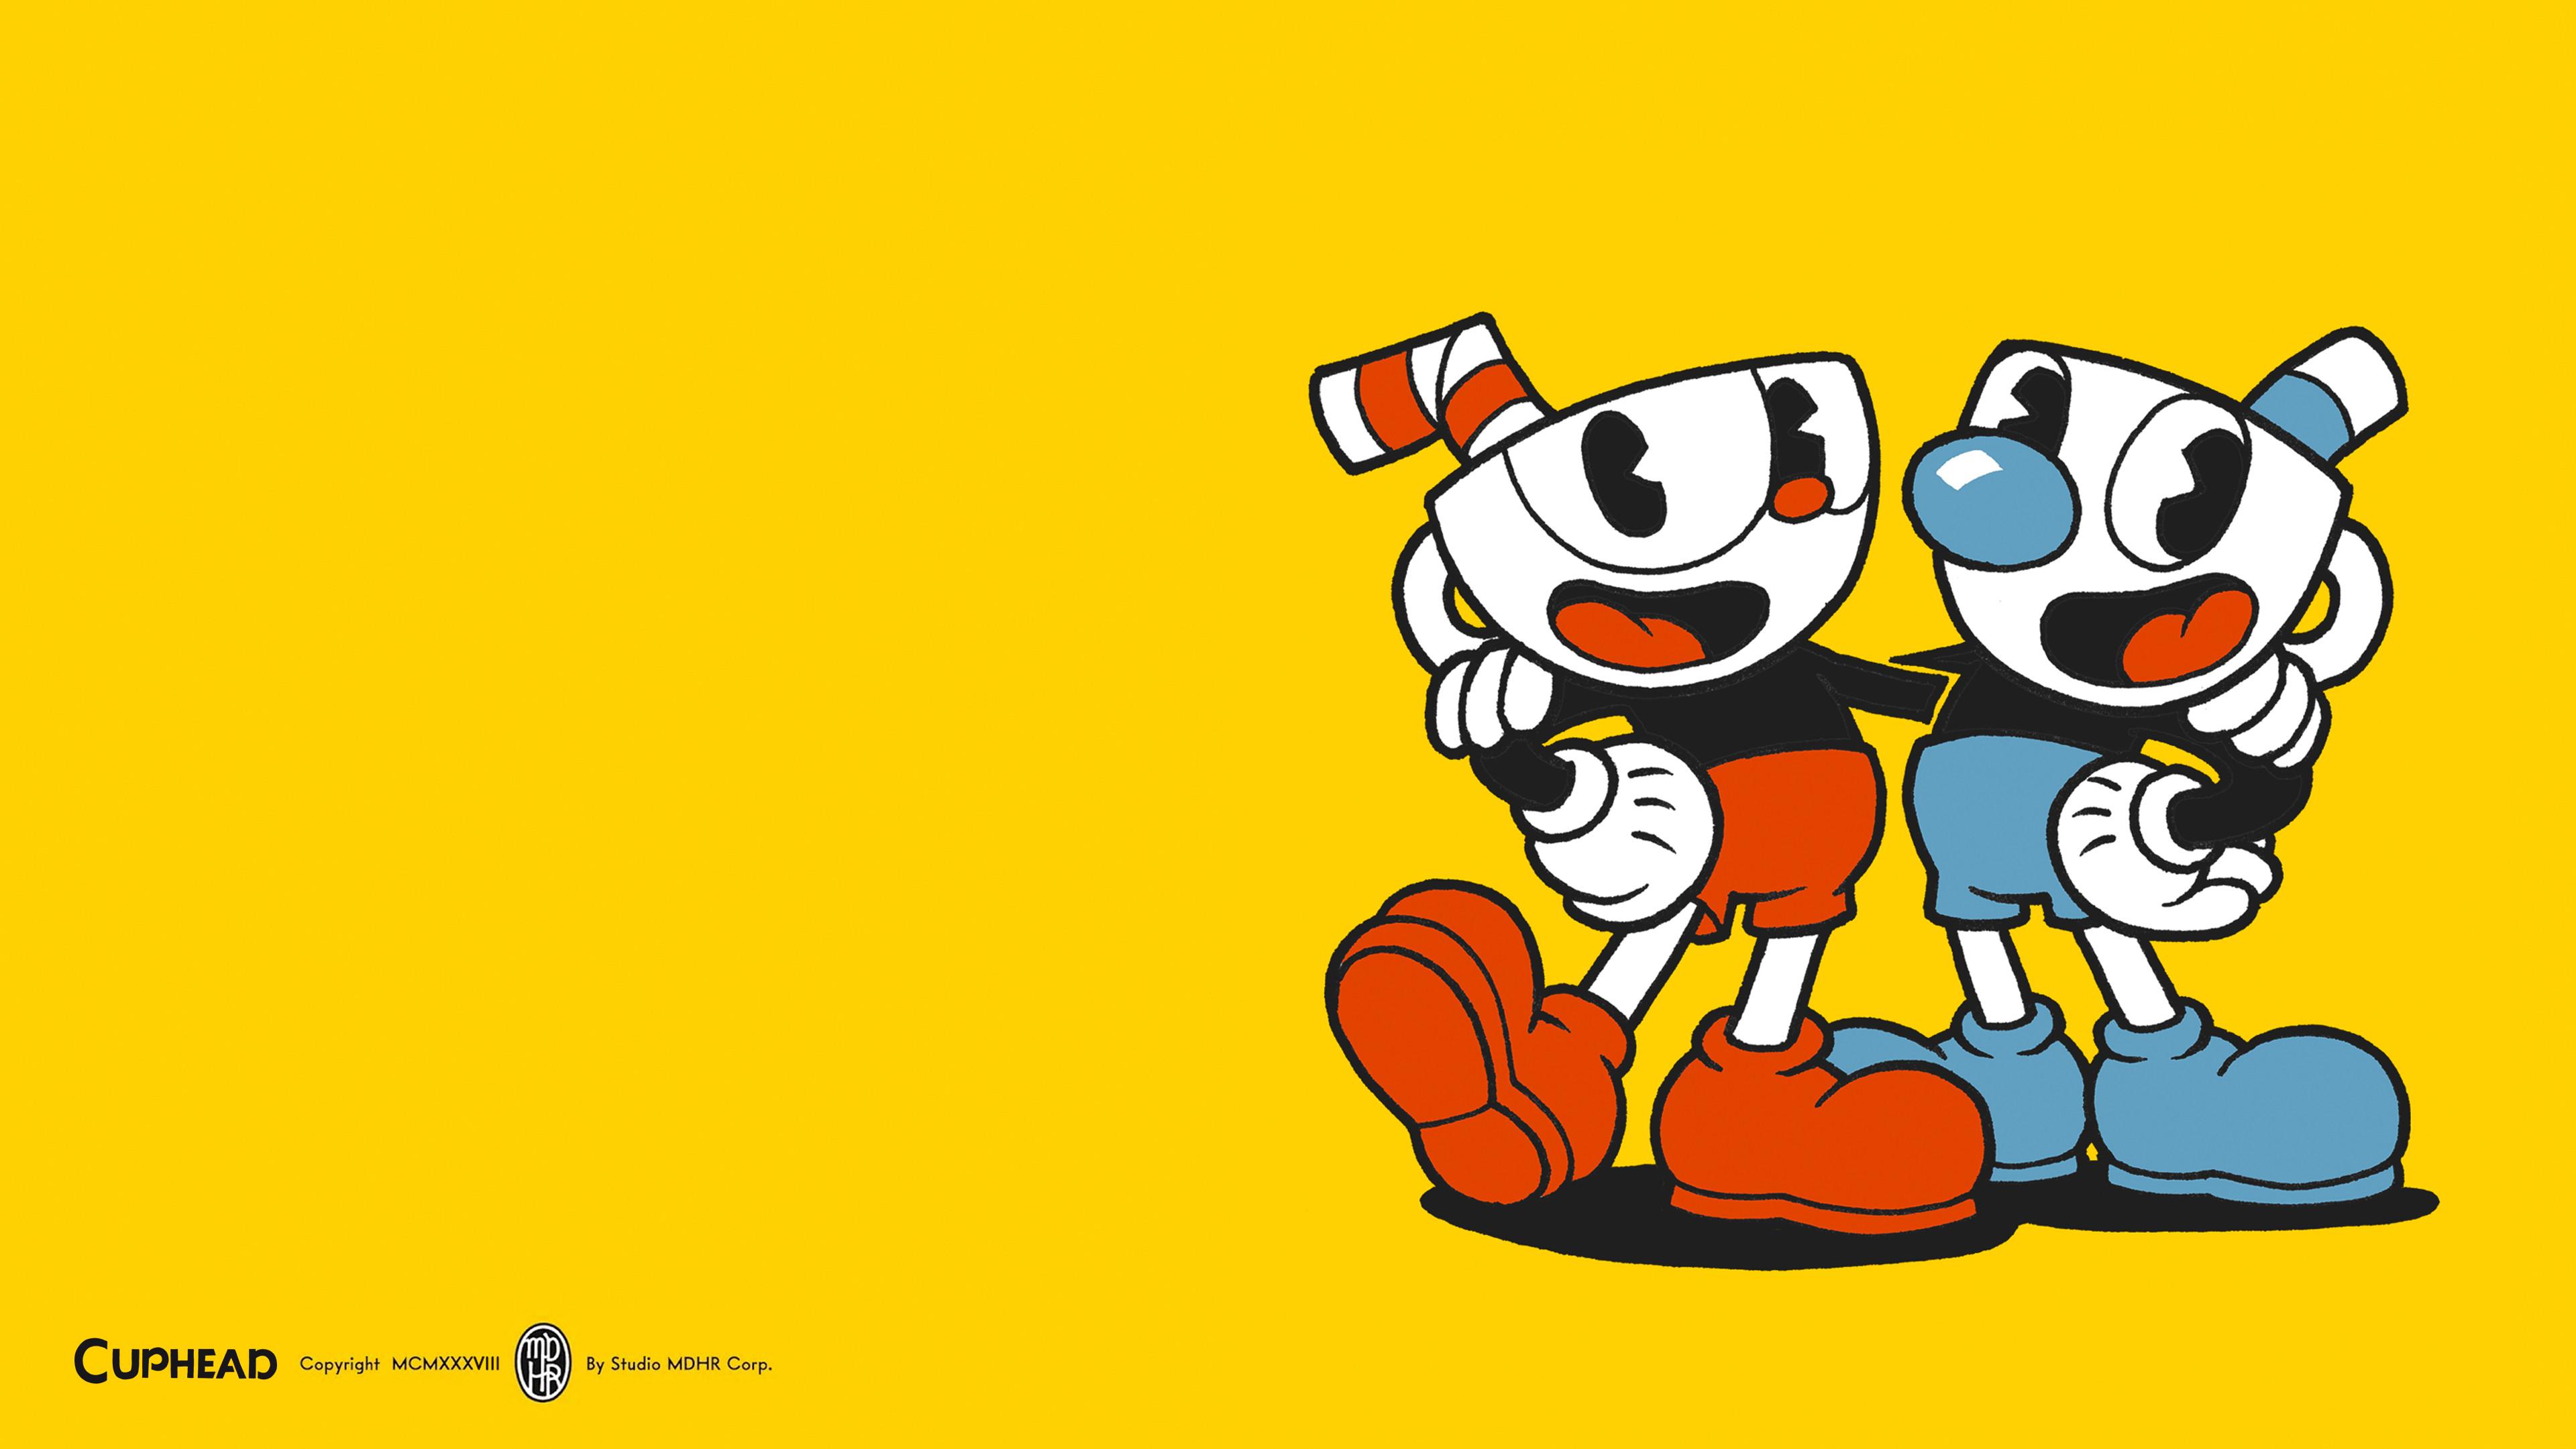 Cuphead and Mugman Color Wallpaper. Cat with Monocle